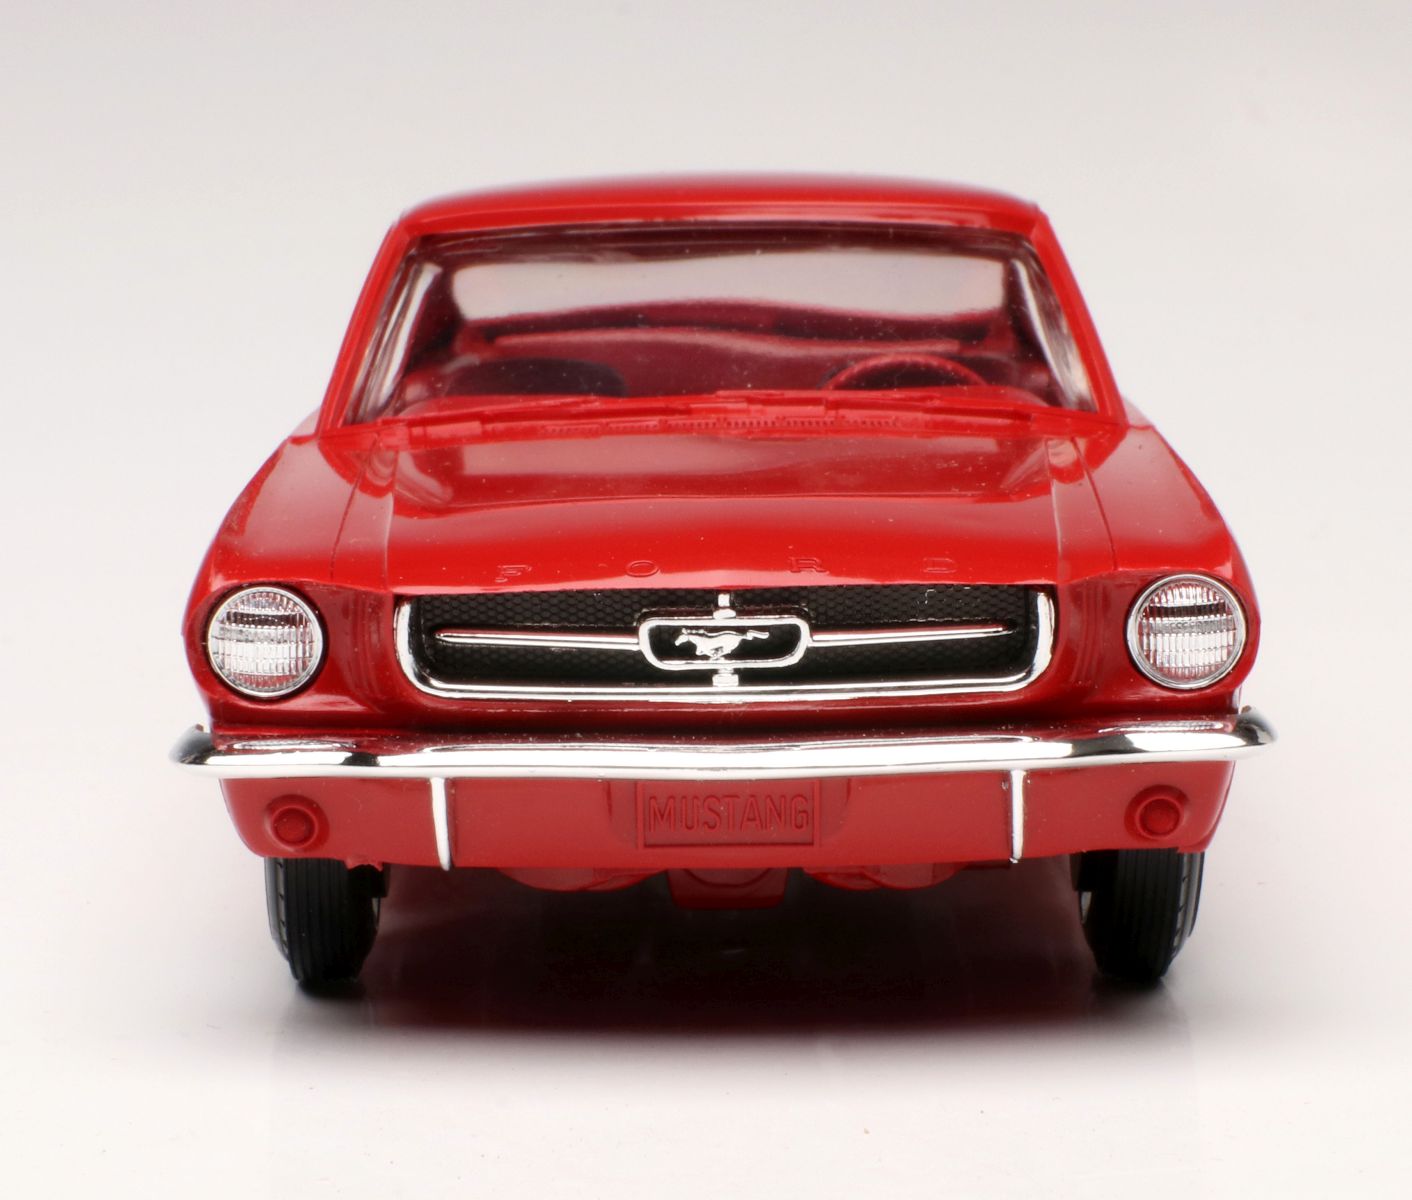 A RED 1965 MUSTANG FASTBACK PROMO CAR IN BOX